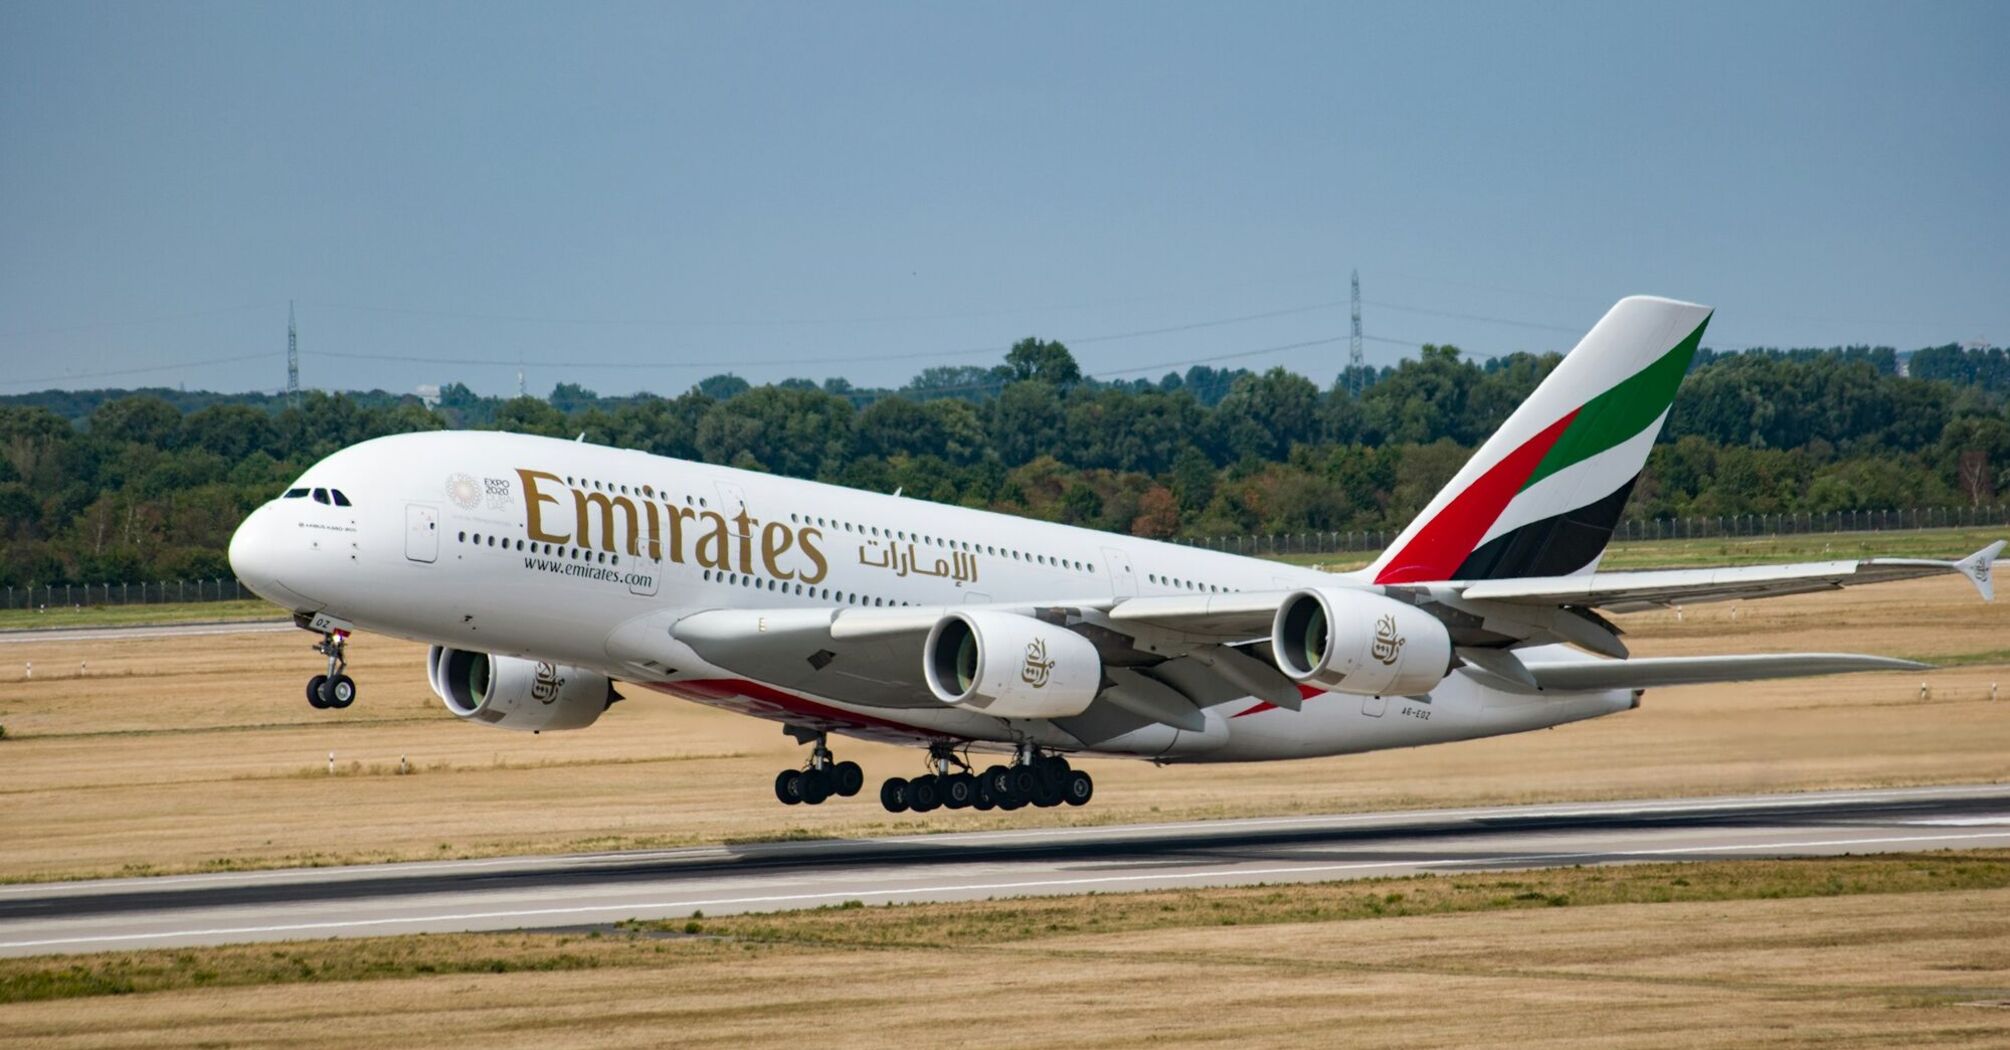 Emirates A380 landing on a runway